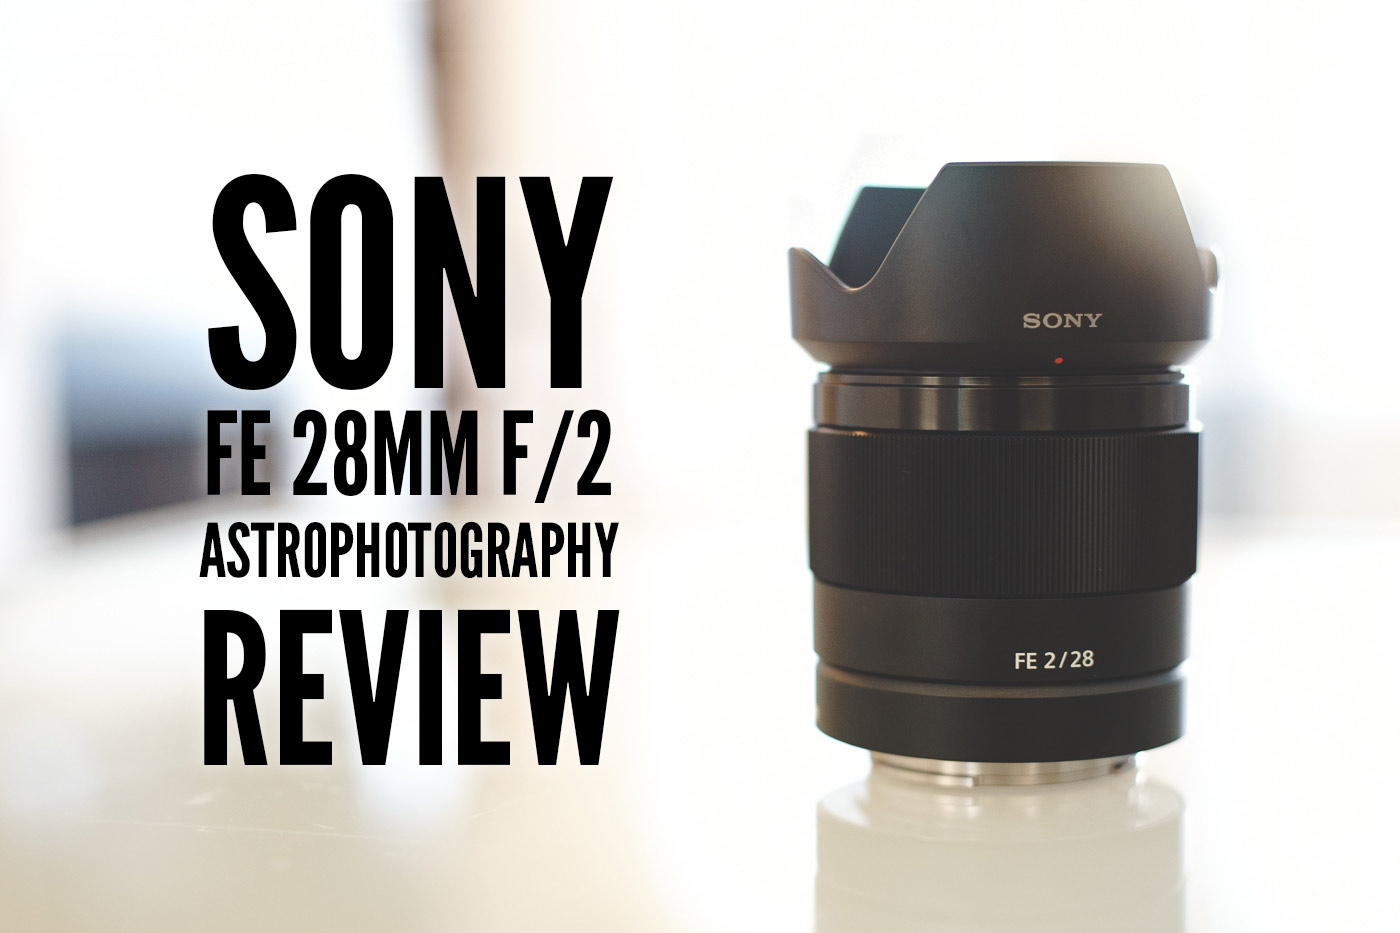 Sony FE 28mm f/2 Astrophotography Review